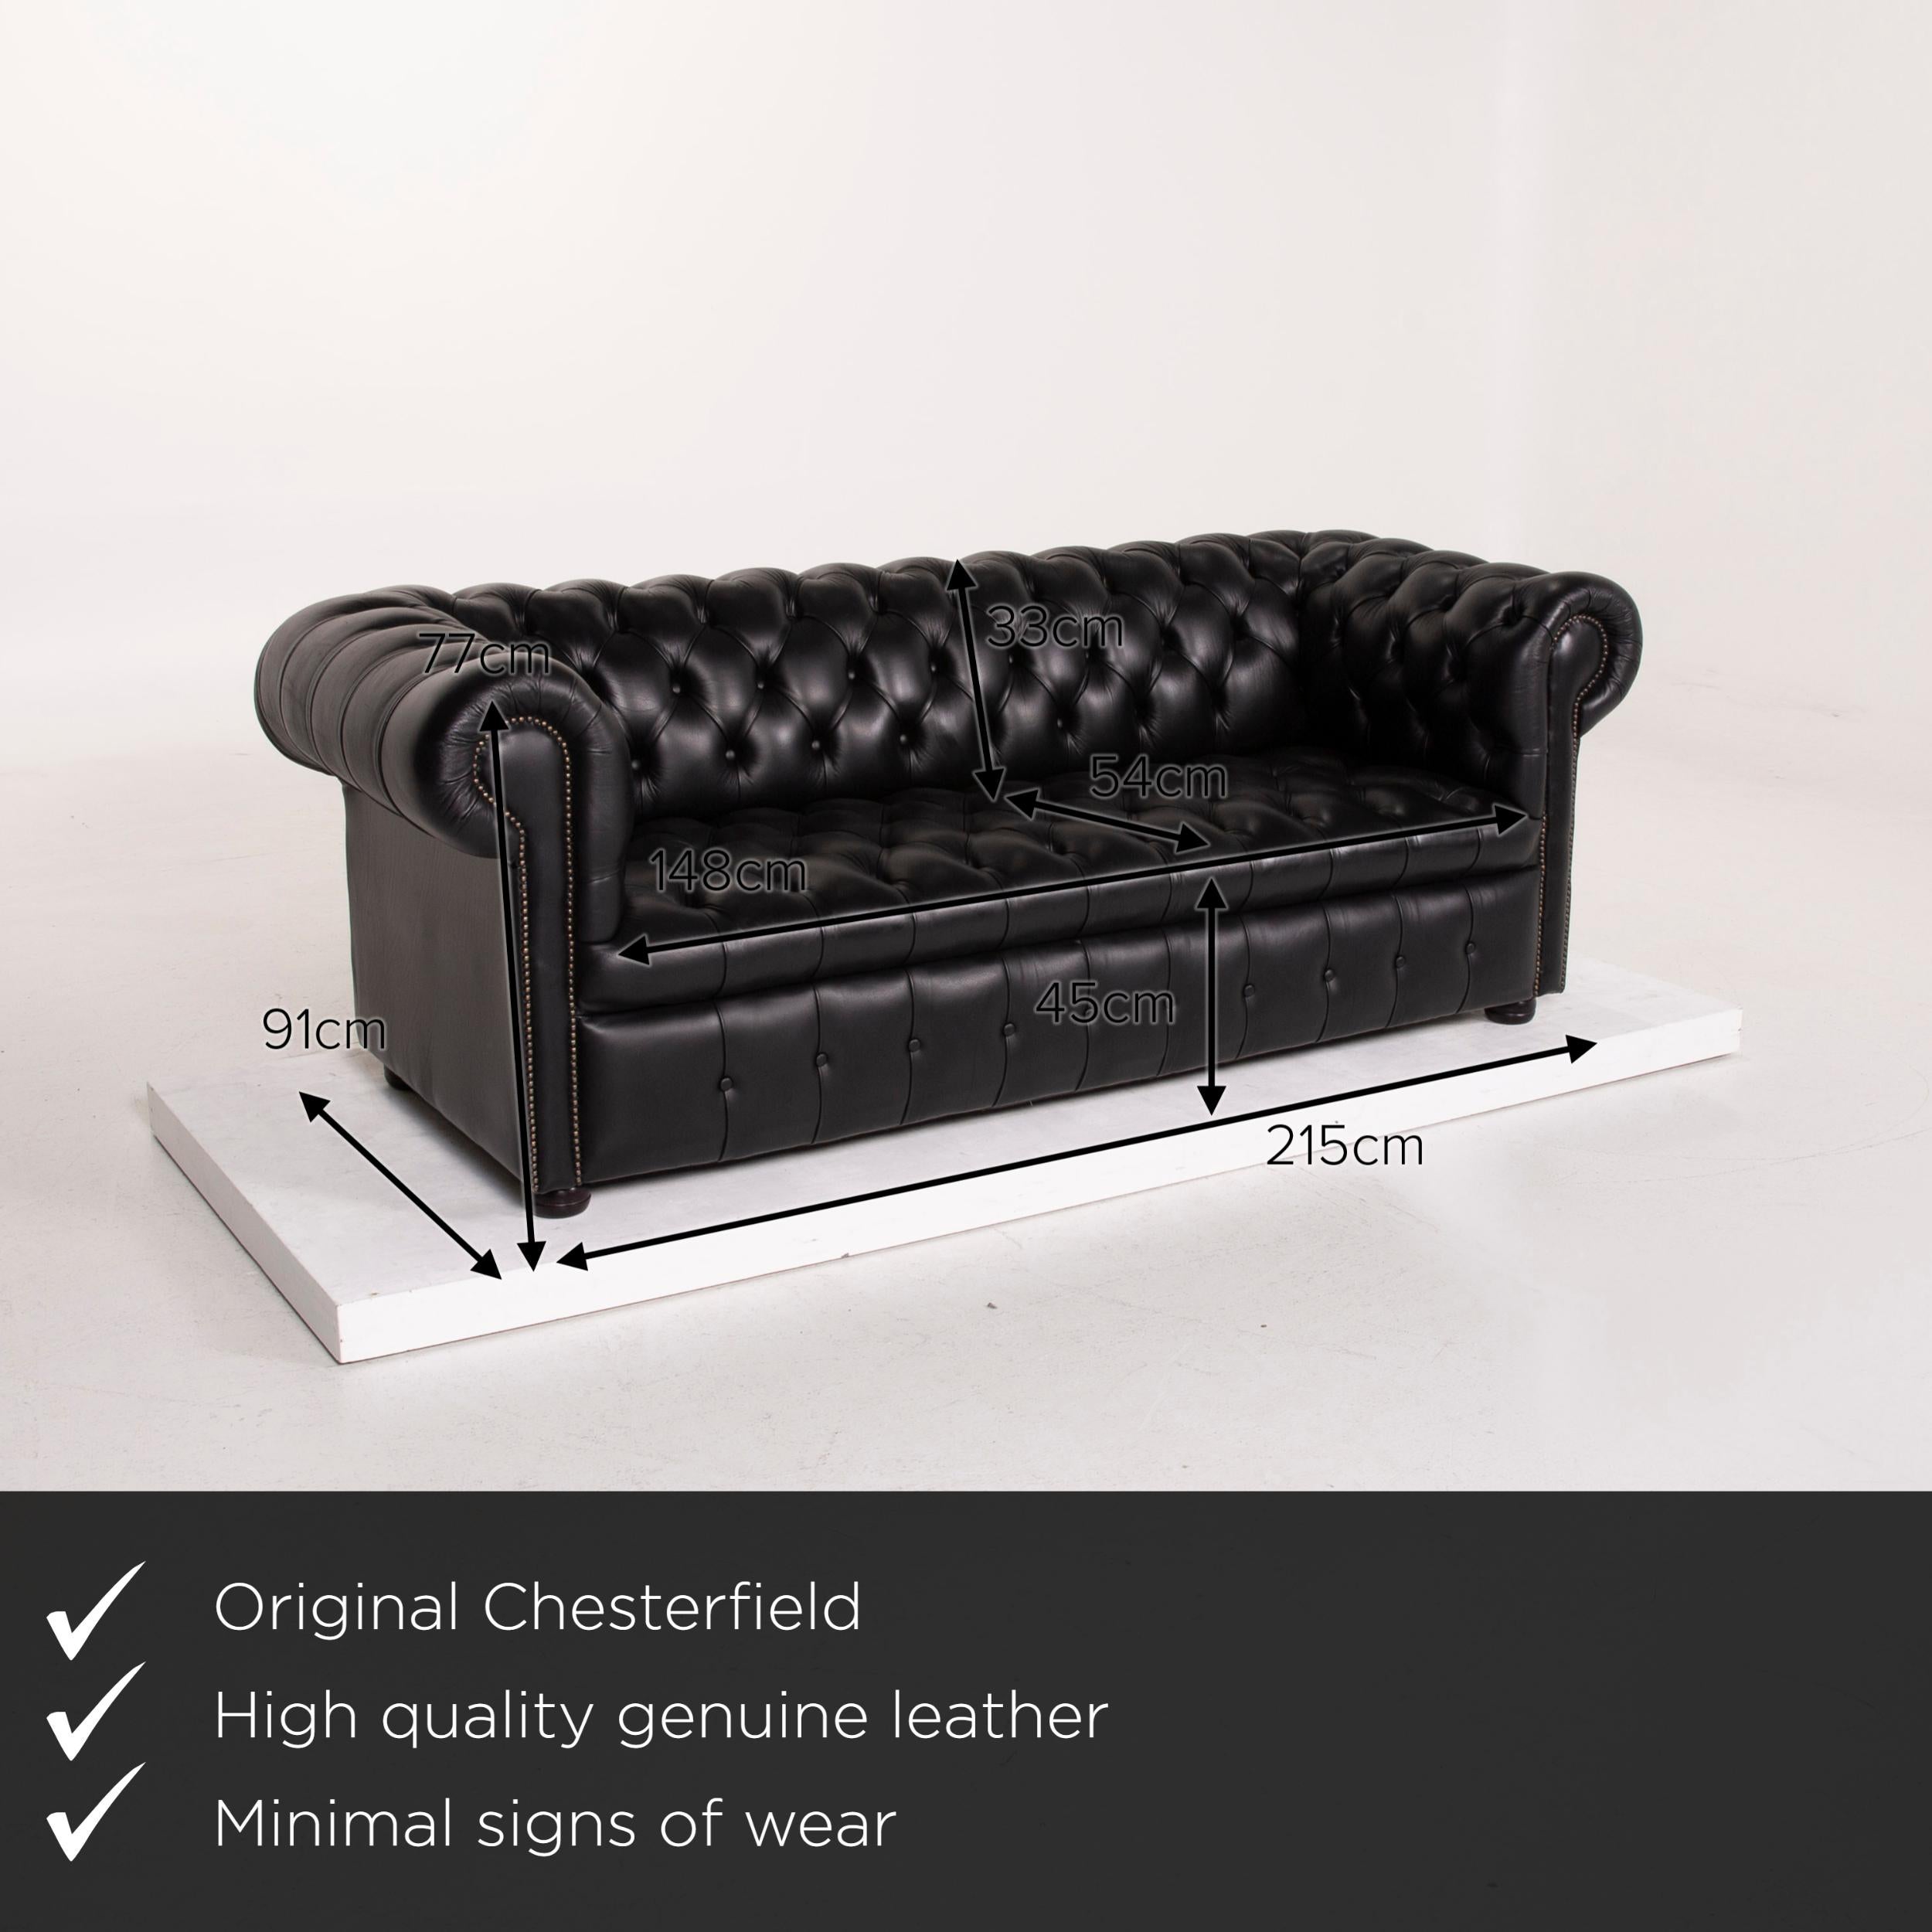 We present to you a Chesterfield leather sofa black three-seat.
  
 

 Product measurements in centimeters:
 

Depth 91
Width 215
Height 77
Seat height 45
Rest height 77
Seat depth 54
Seat width 148
Back height 33.